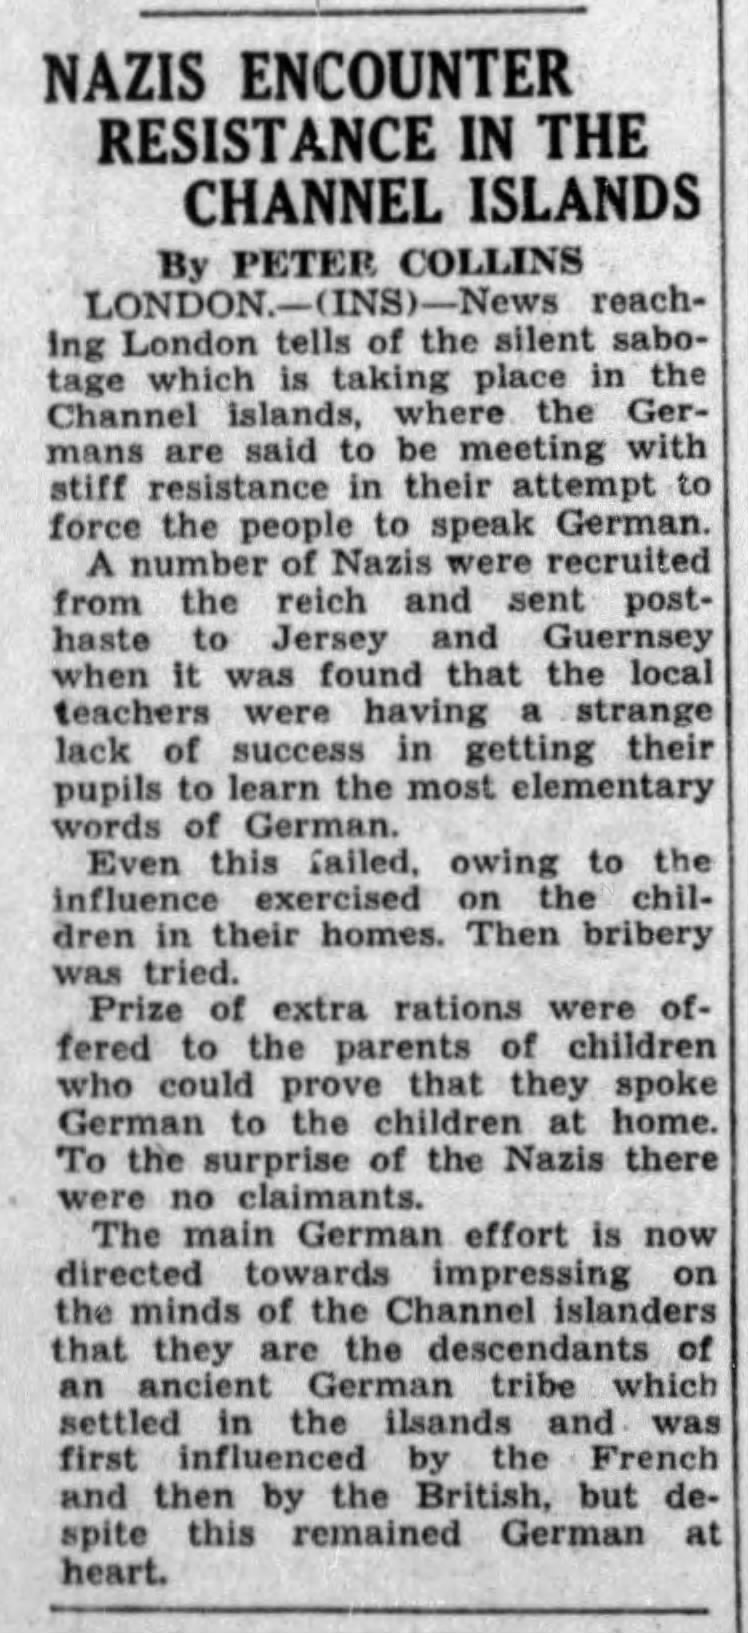 Channel Islanders reportedly refuse to learn German as "silent sabotage" 8/27/1942